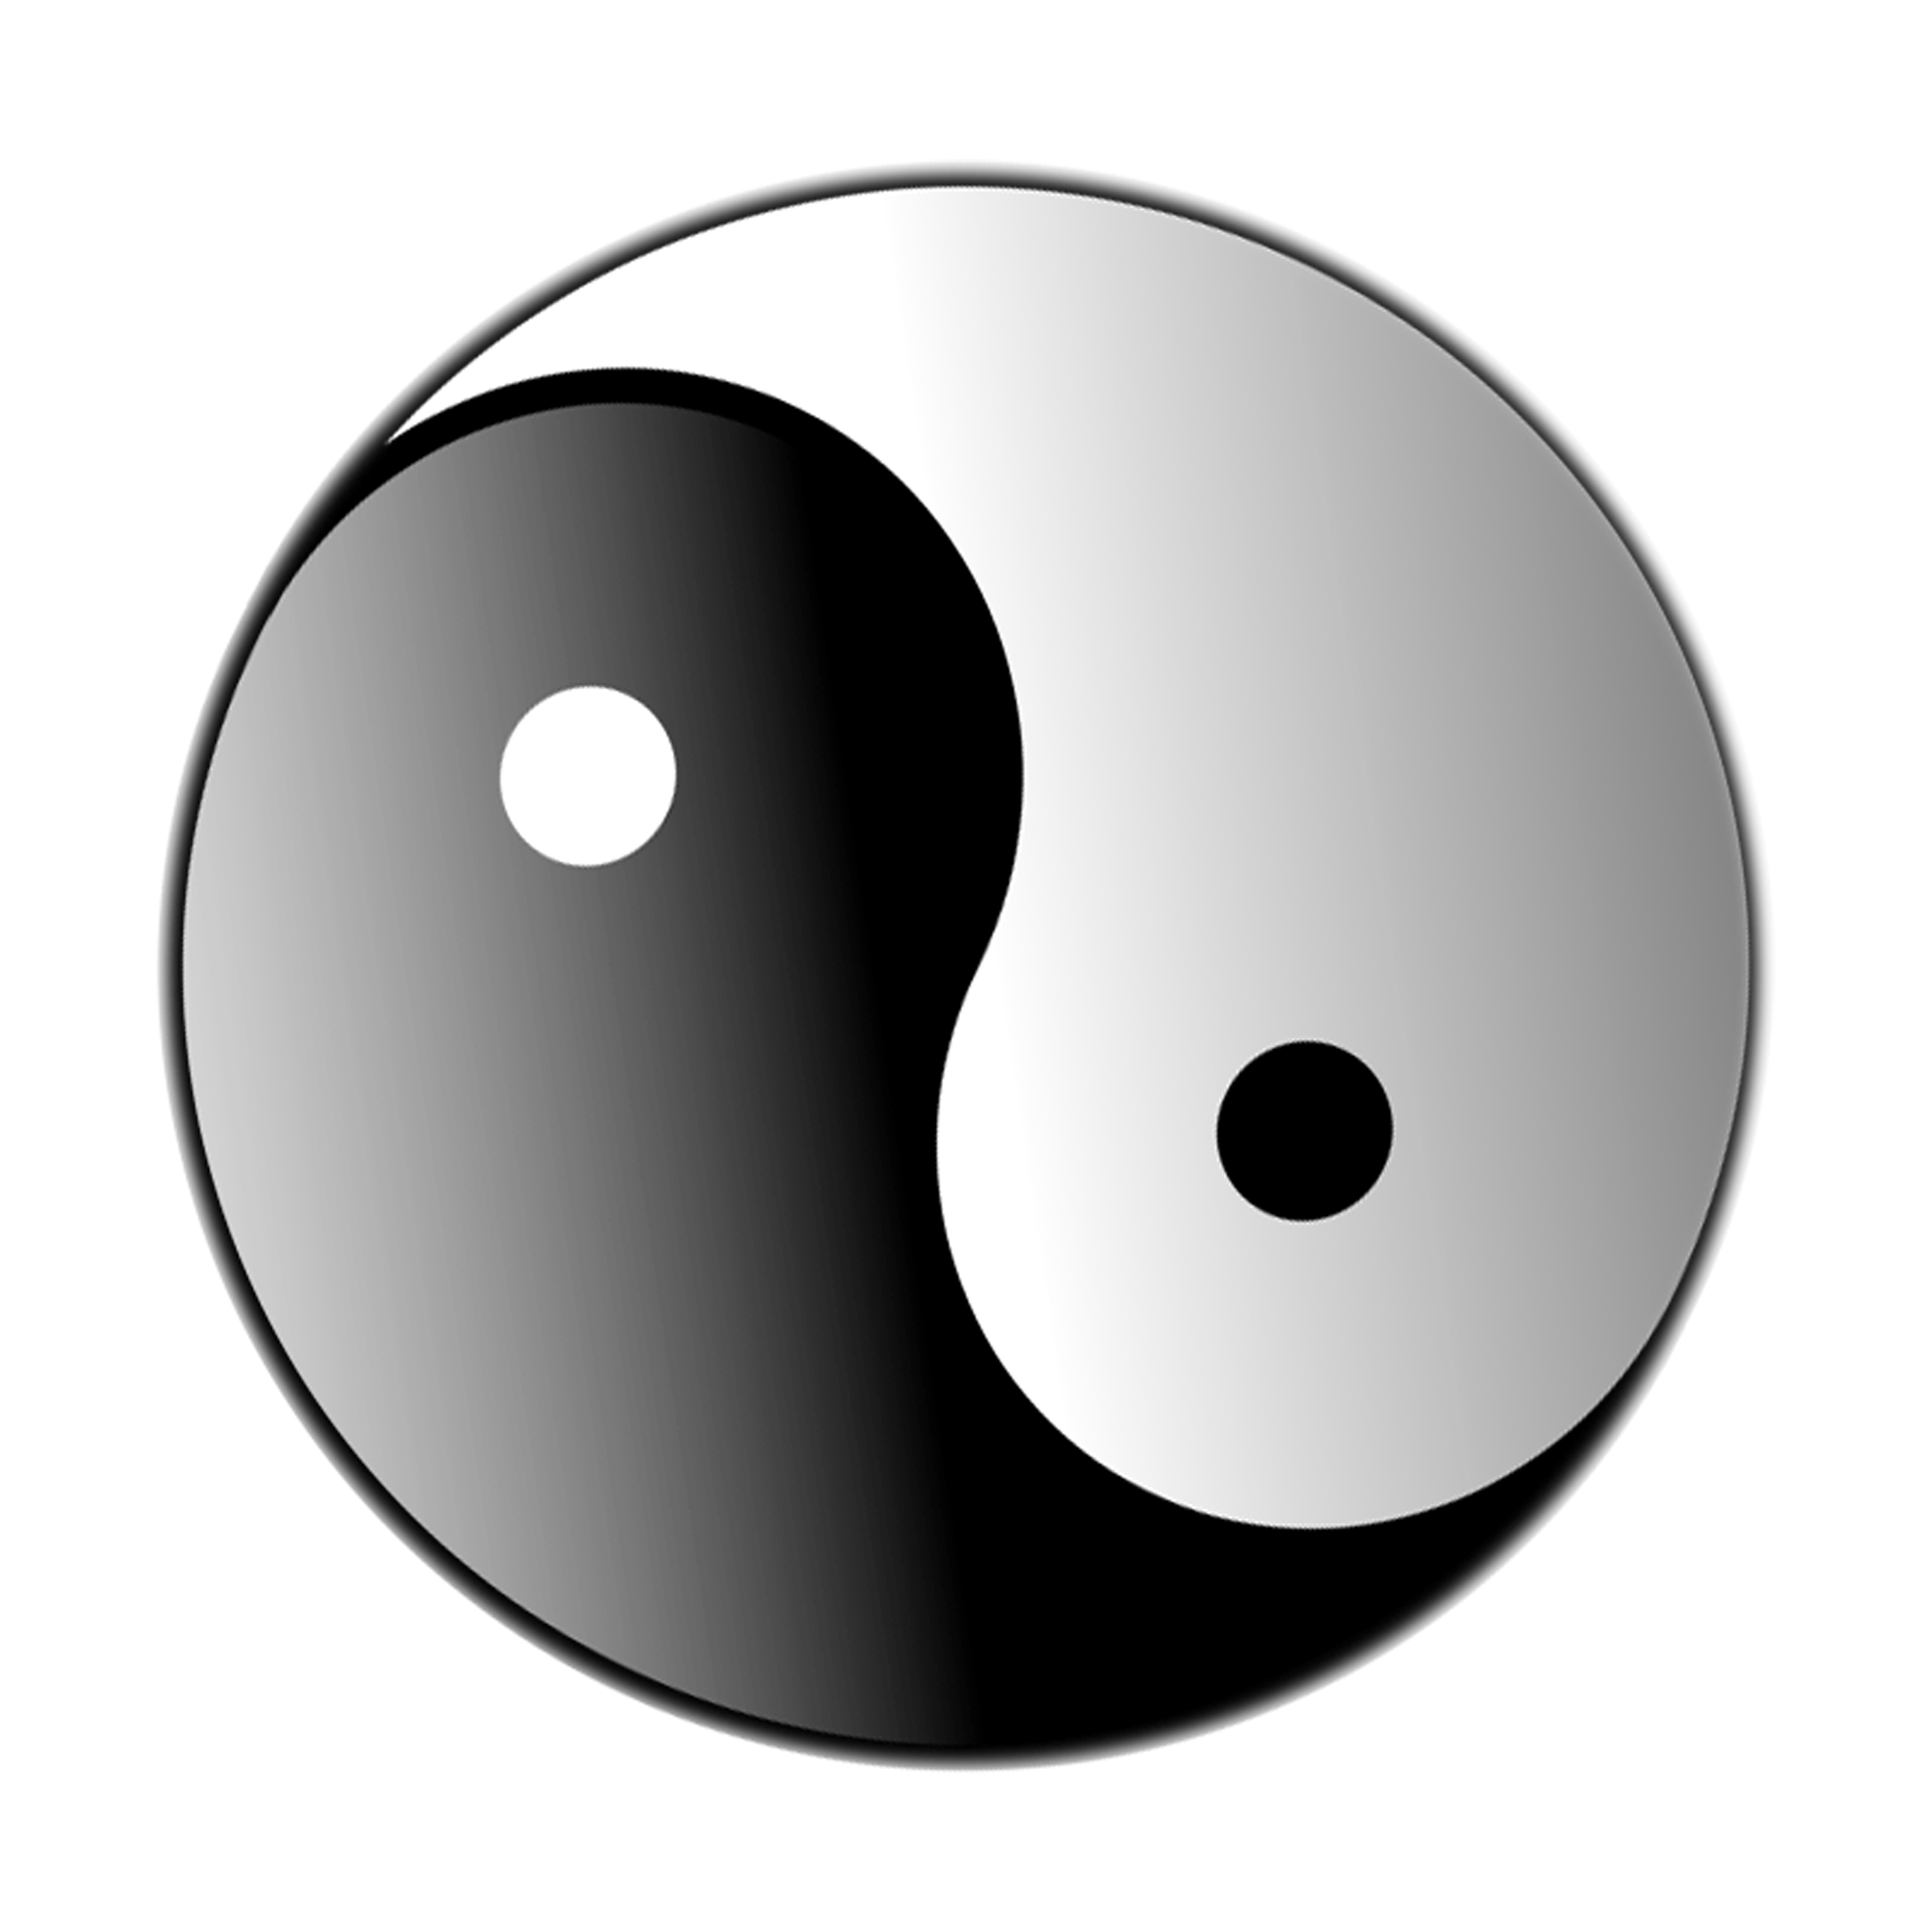 What is the yin and yang symbol mean - boardbetta